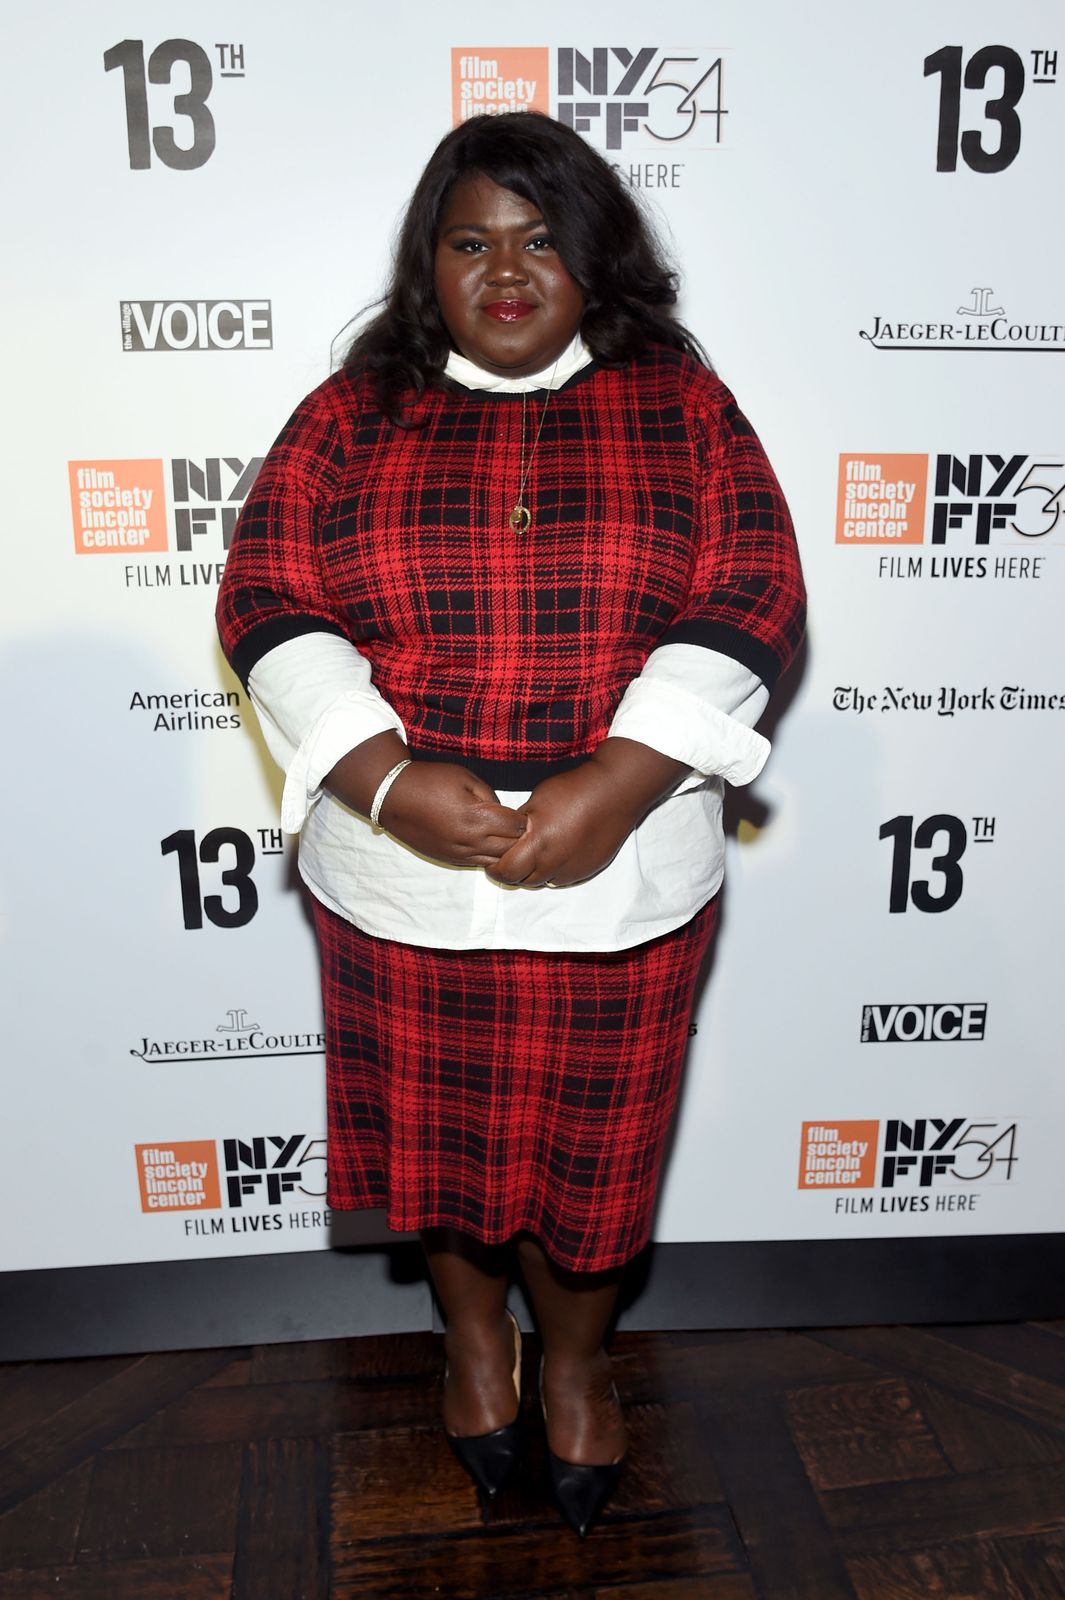 Gabourey Sidibe at the New York Film Festival opening night party  in New York City on September 30, 2016. | Photo: Getty Images